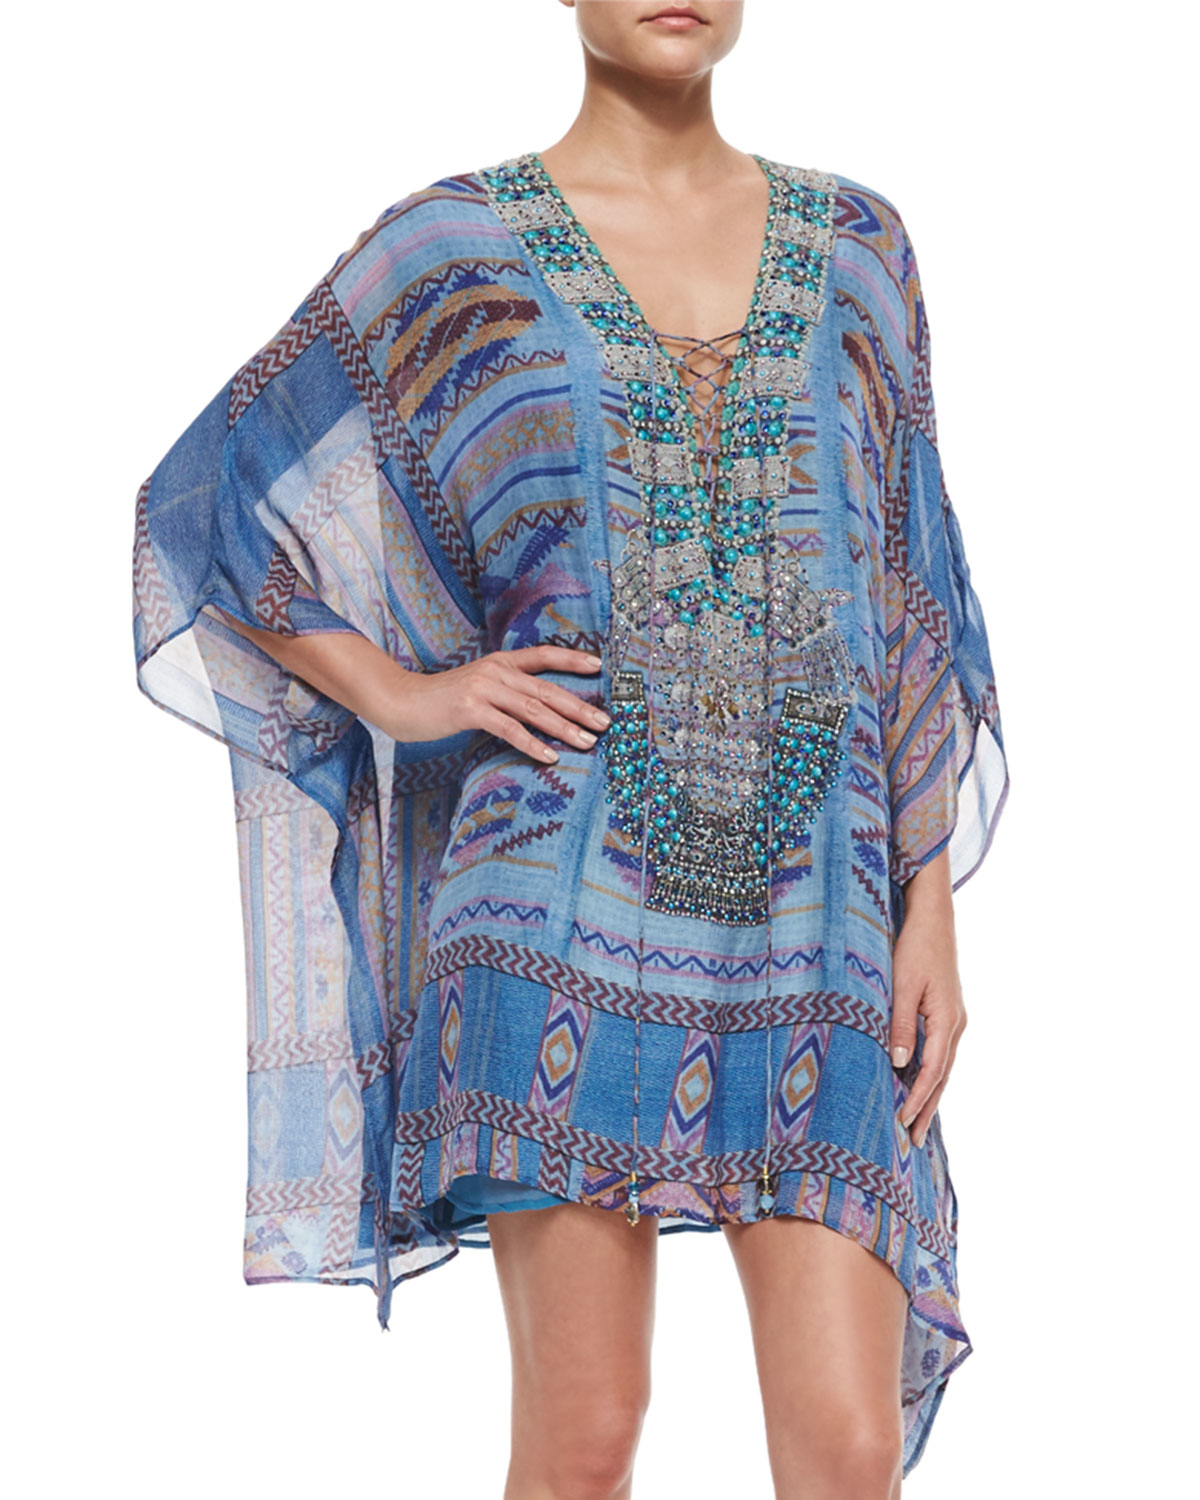 Lyst - Camilla Printed Lace-up Short Caftan Dress in Blue